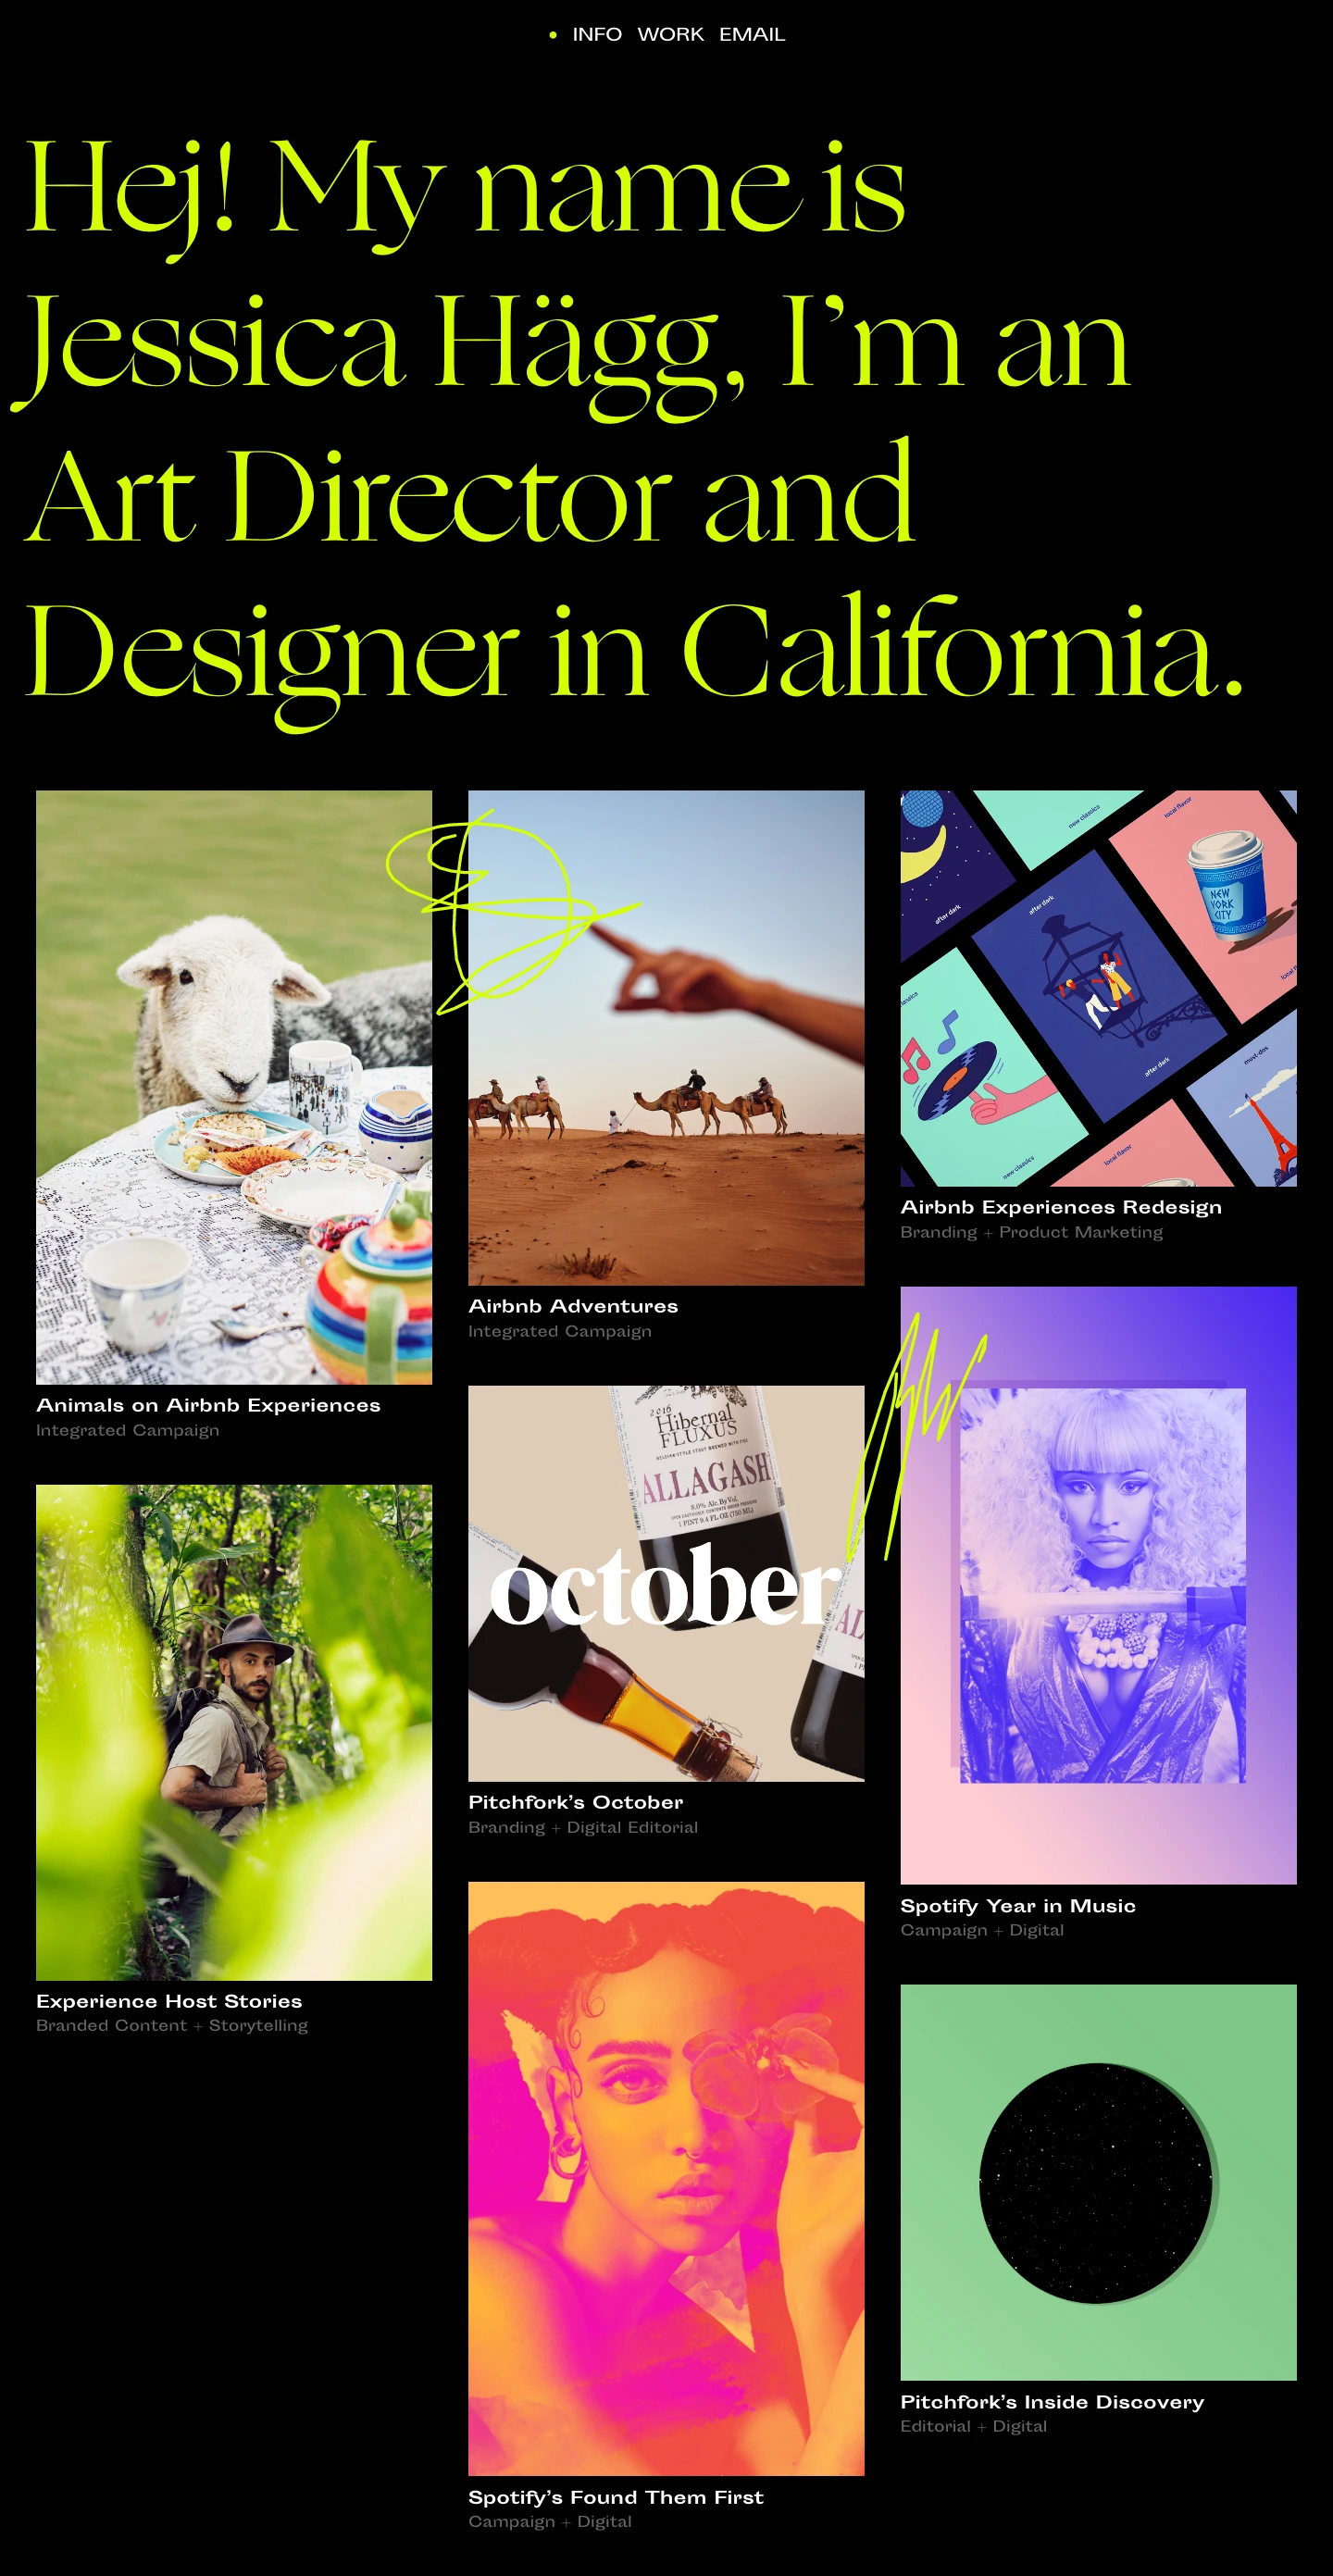 Jessica Hägg Landing Page Example: Swedish Art Director and Designer experienced in the intersection between product, brand, editorial design and marketing. I spend my days collaborating with creatives, designers, producers, editors and marketers focusing on launching products, developing campigns and making branded content that's fresh and fun. Based in San Francisco, CA.